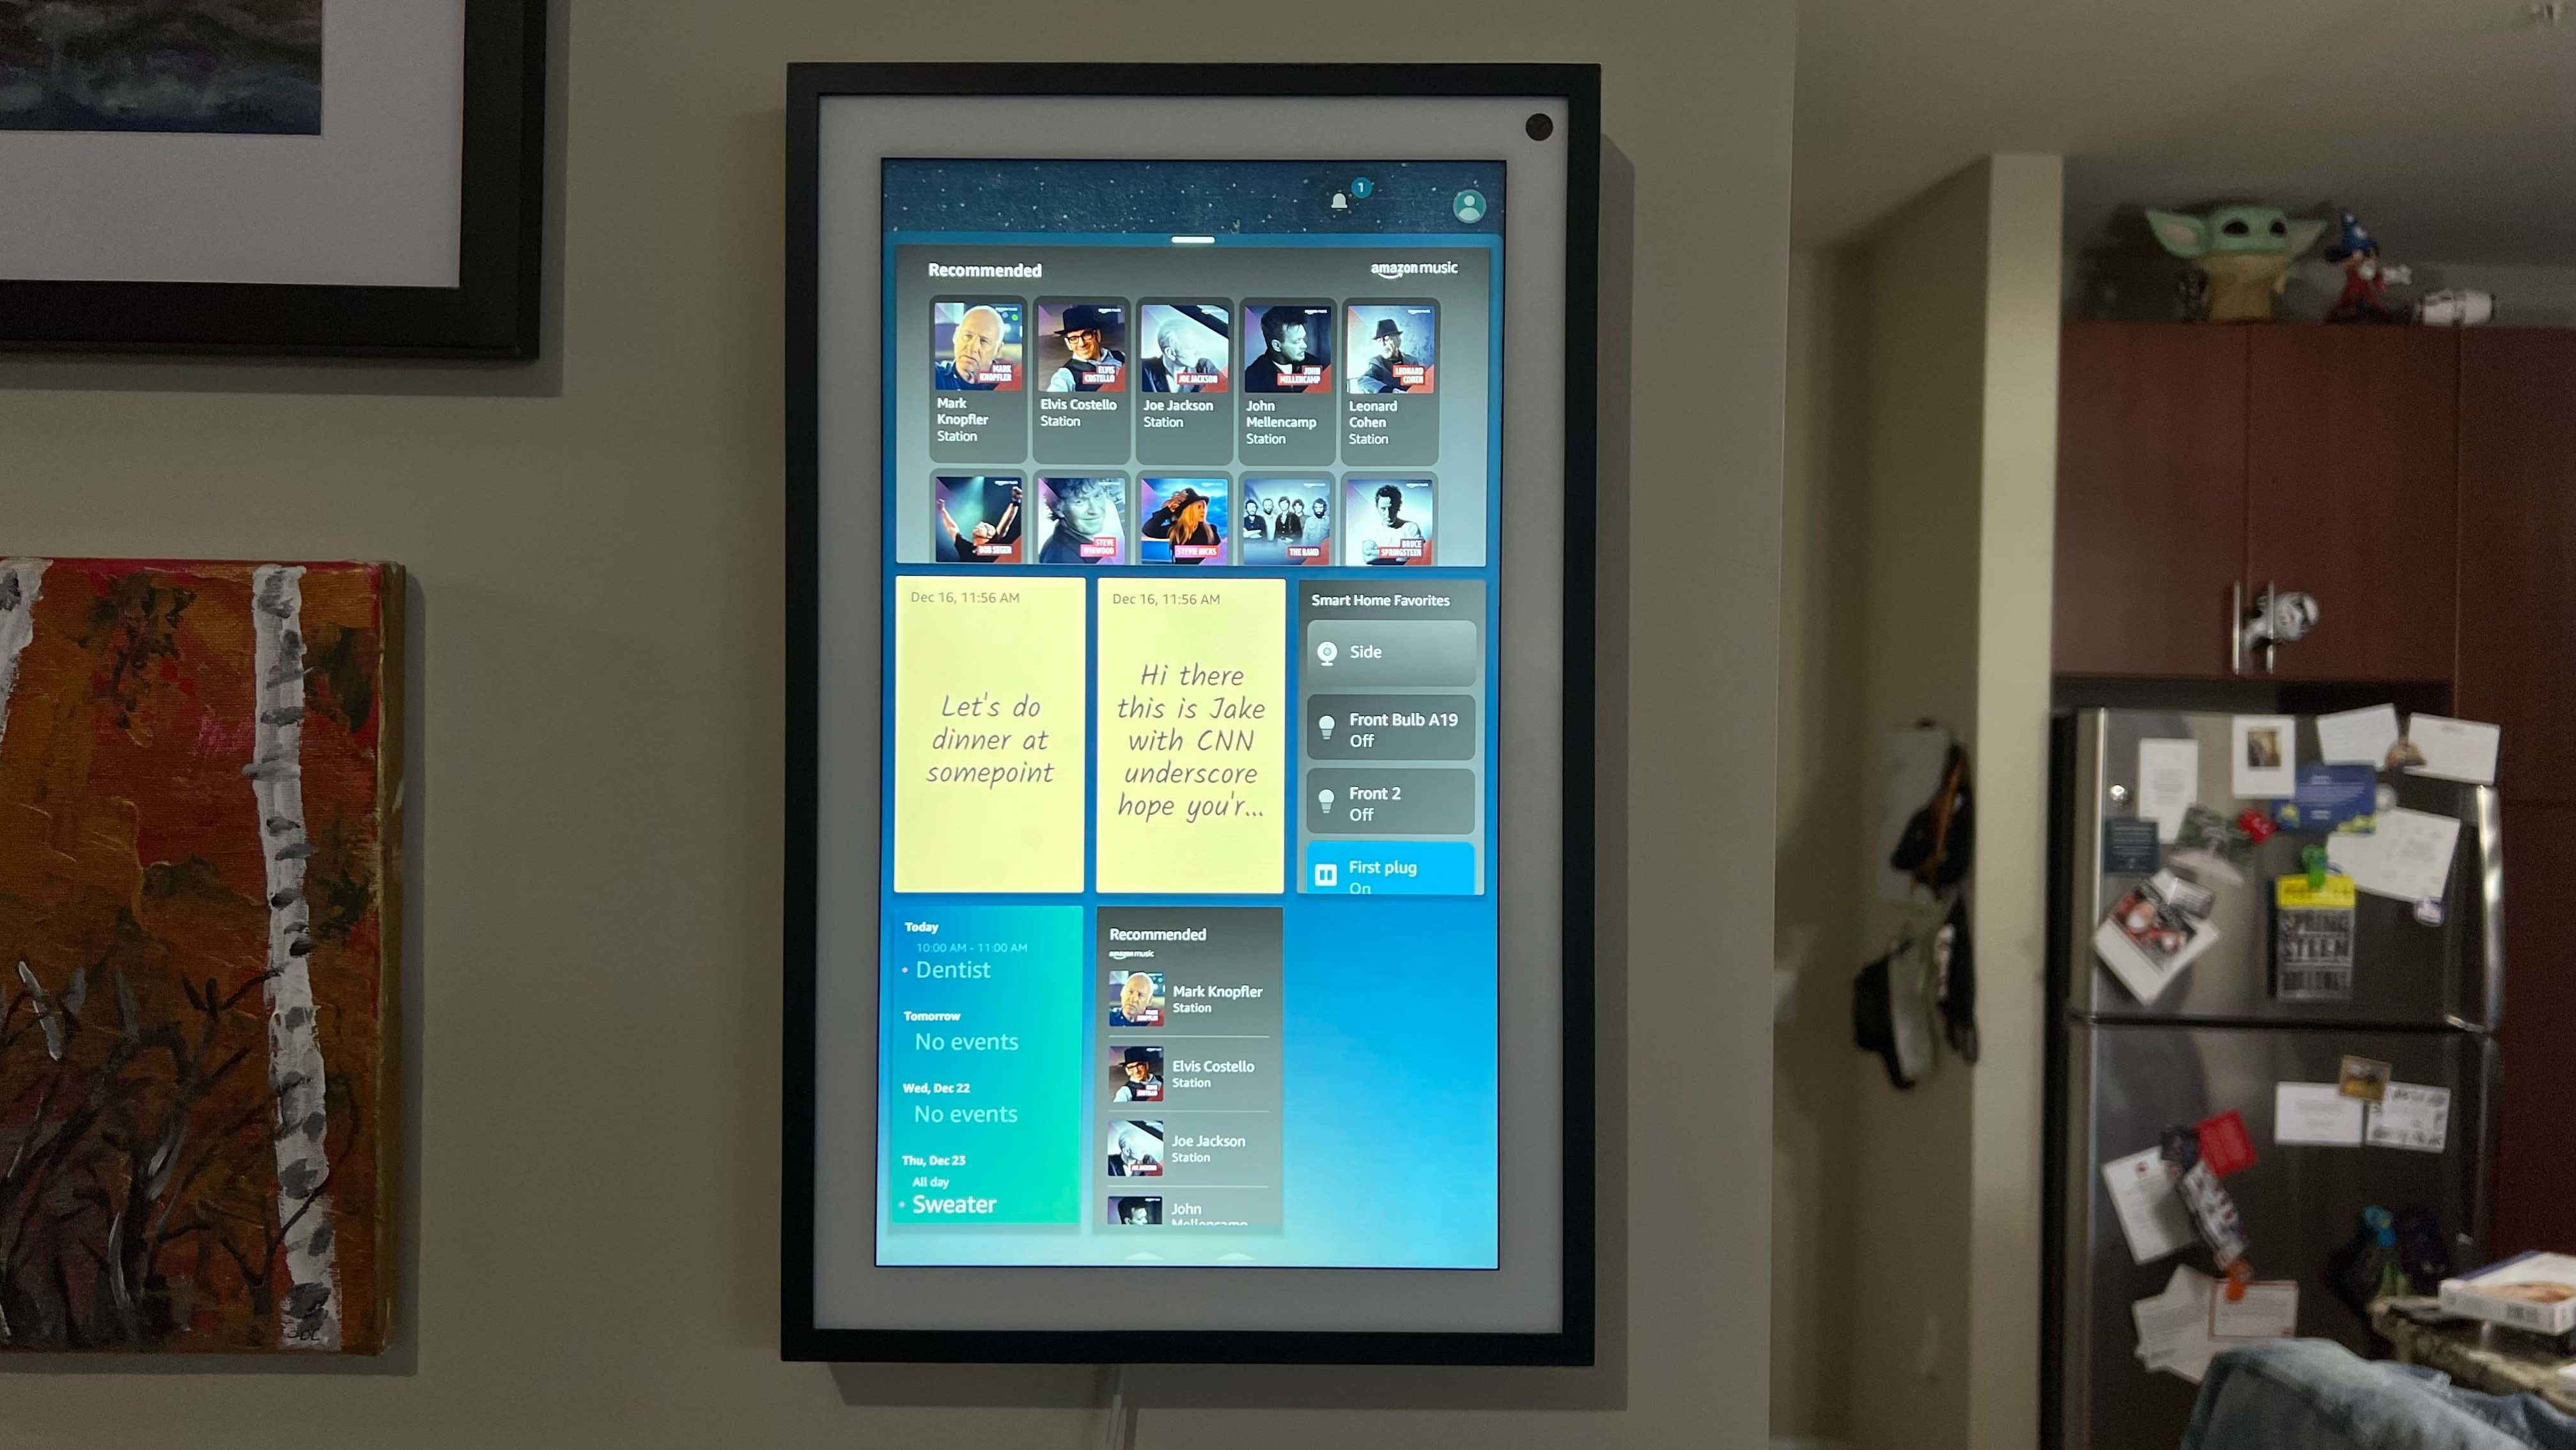 unveils huge 15-inch Echo Show to replace your kitchen TV